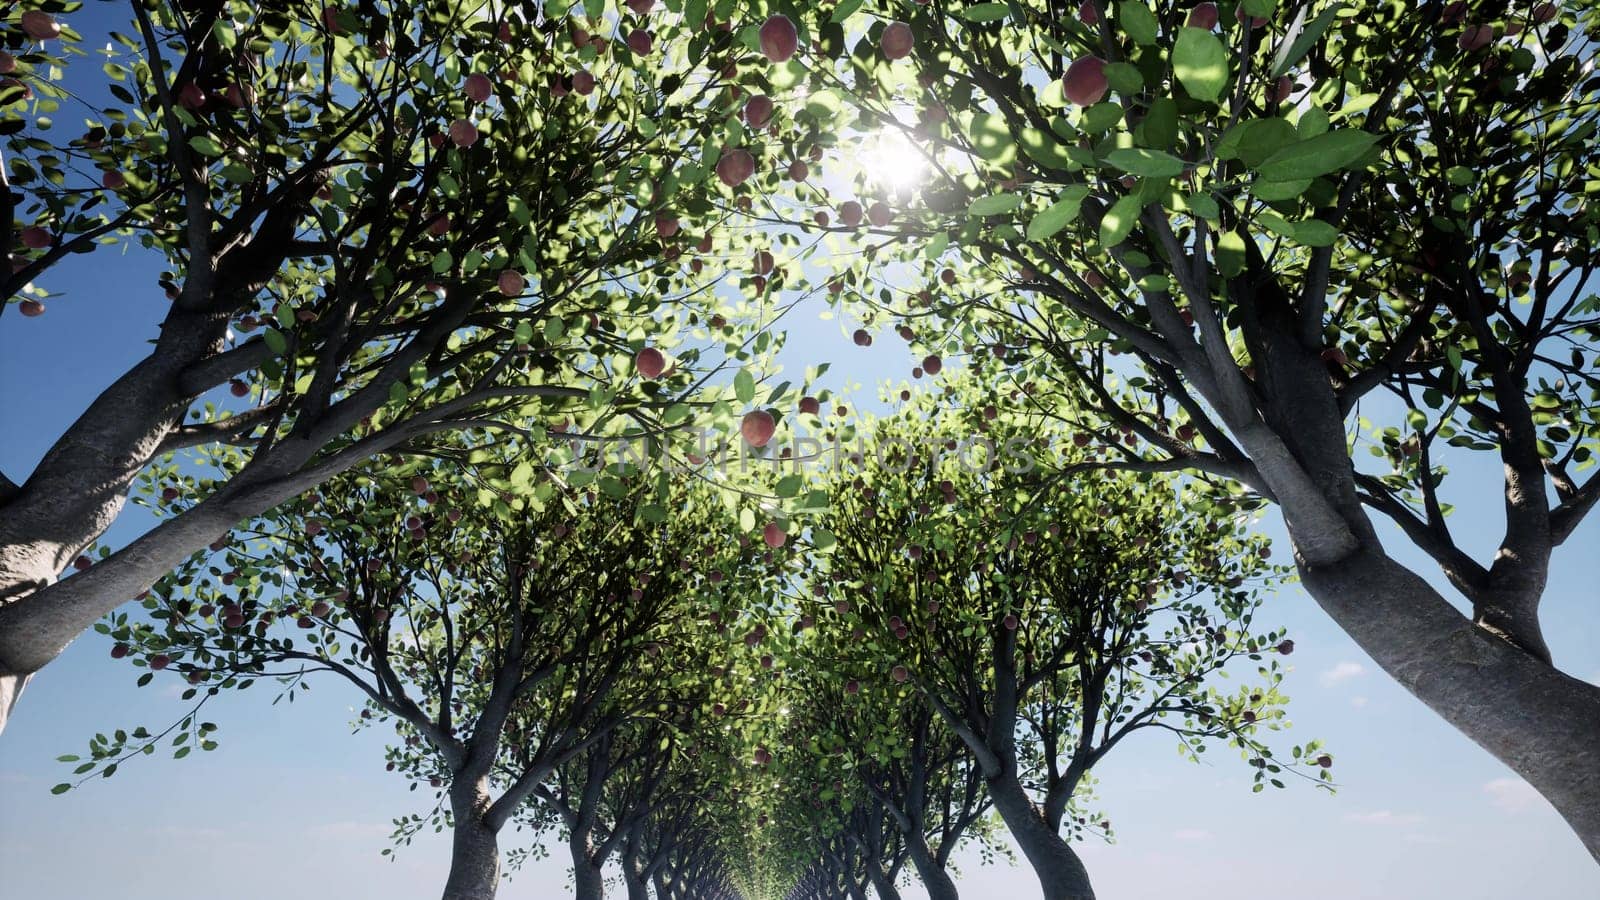 Alley of apple trees sunny weather 3d render by Zozulinskyi